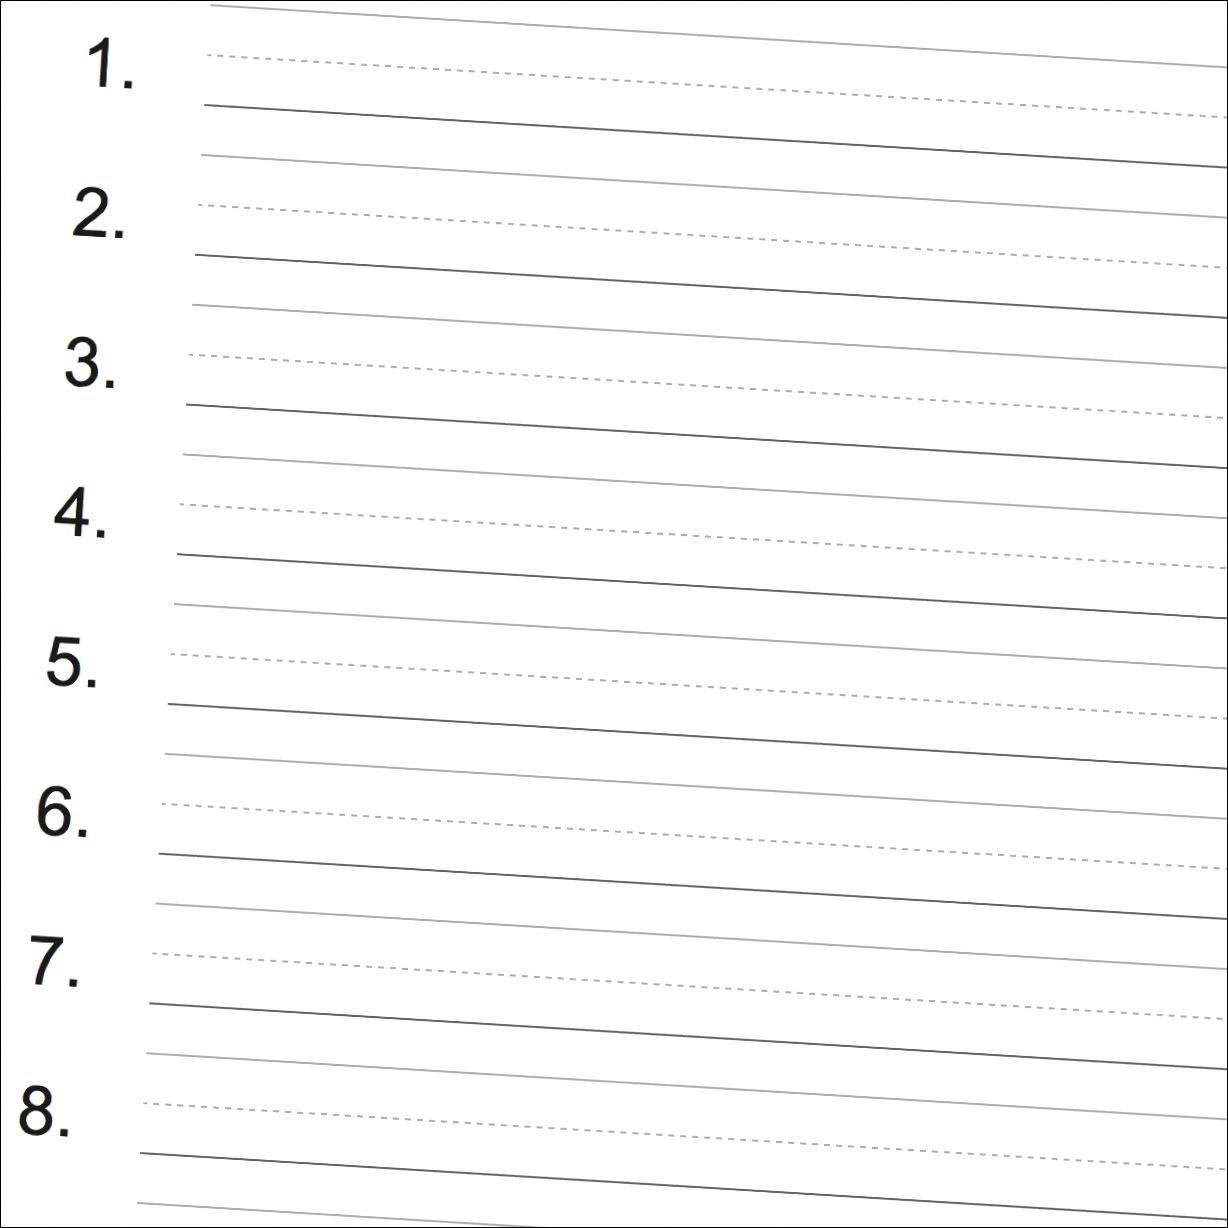 Numbered Printable Handwriting Paper Great For Spelling Tests - Free Printable Handwriting Paper